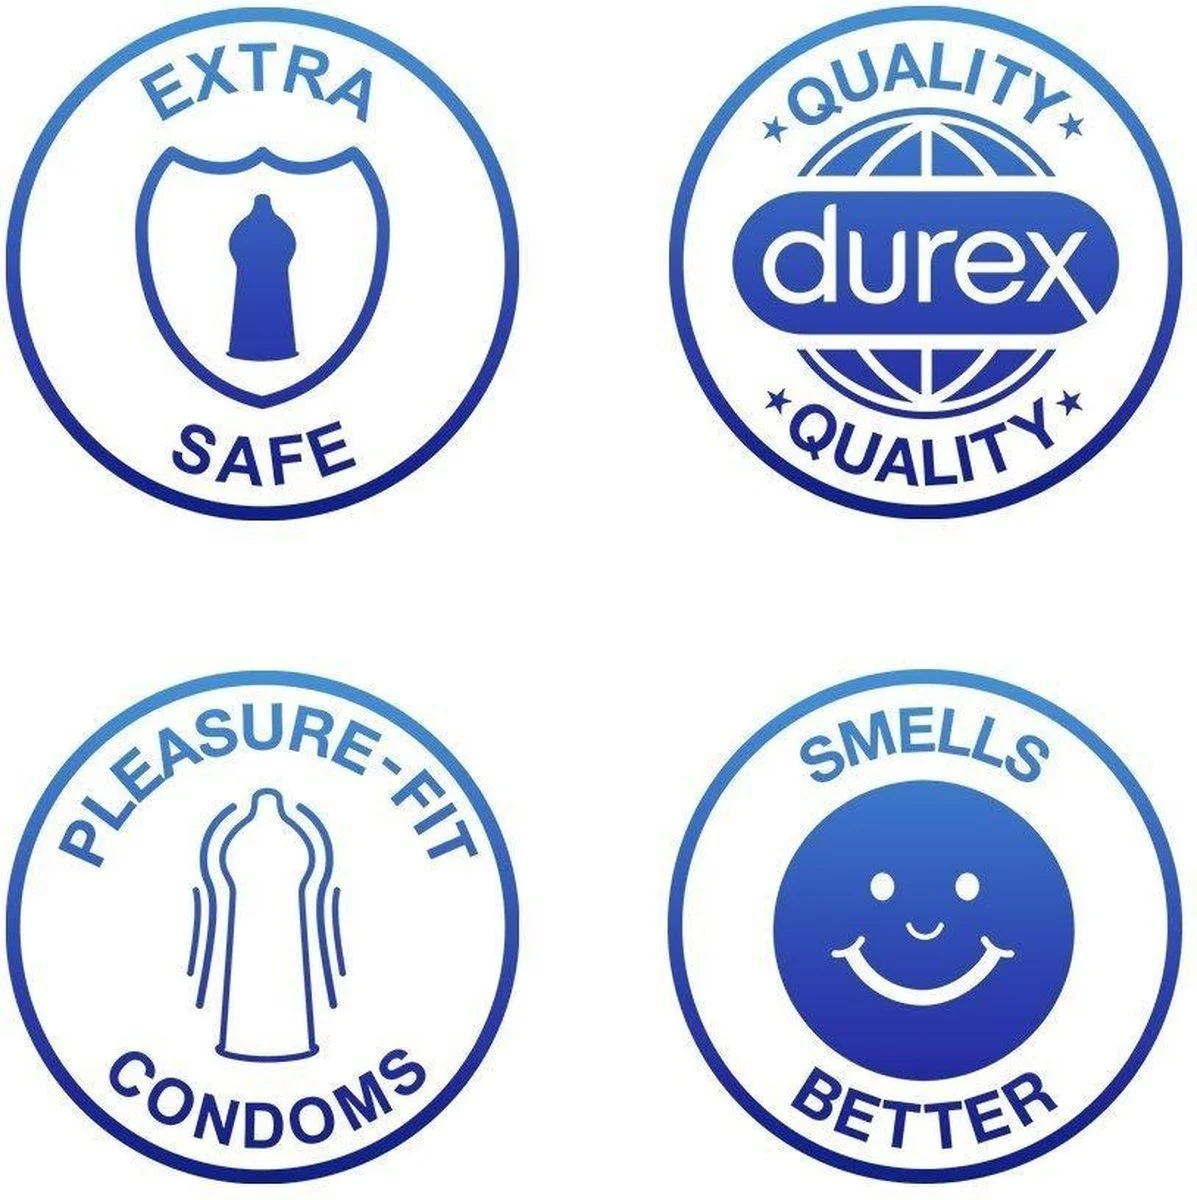 Durex recruiting 50 condom testers for important reason - and they'll each  get £100 - Birmingham Live